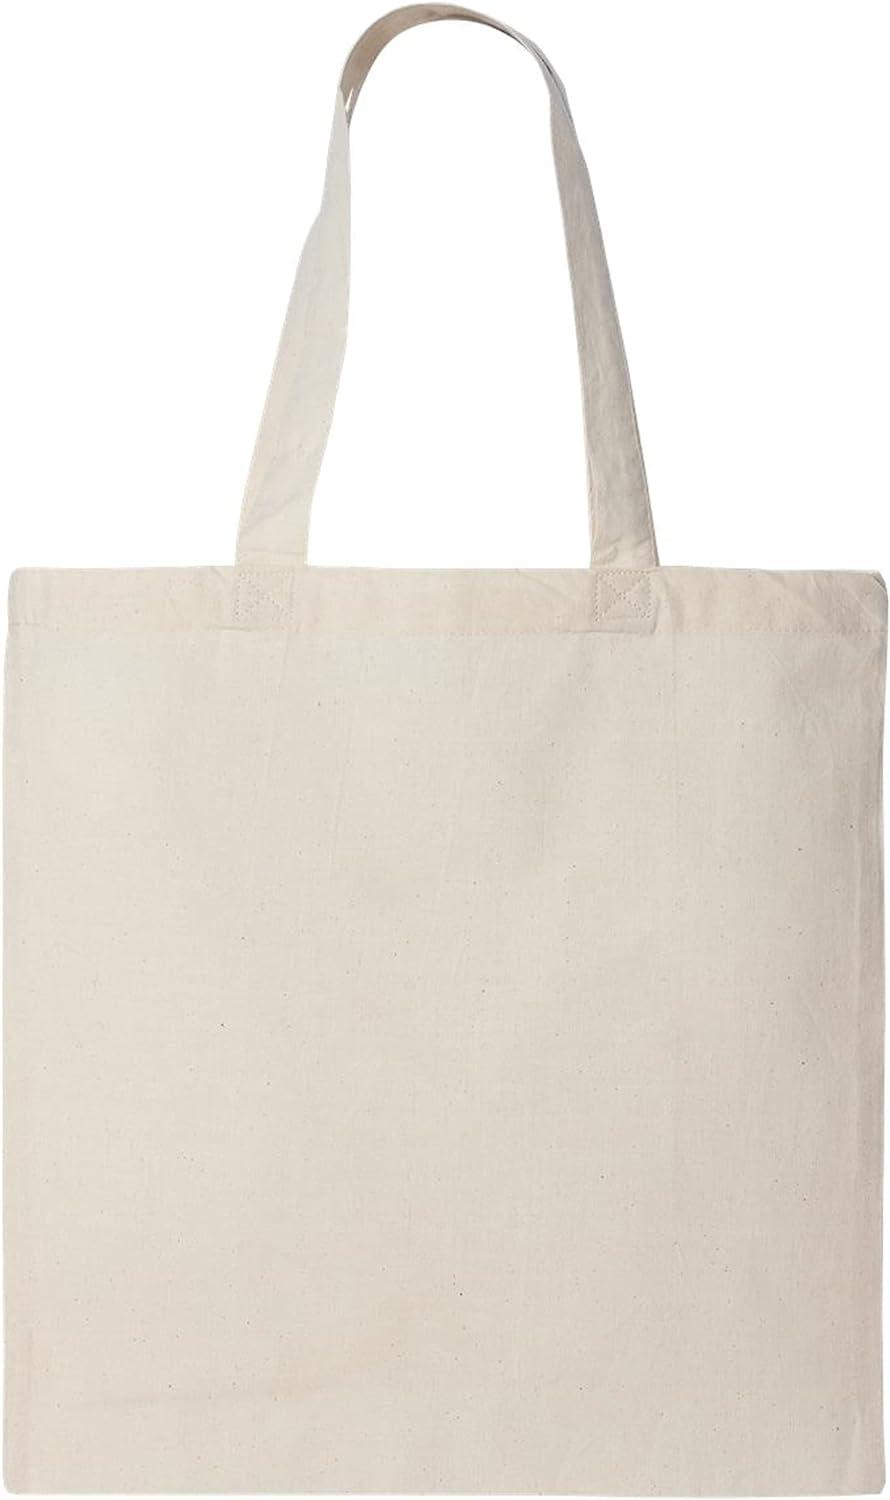 TBF Blank Canvas Tote Bags, 100% Cotton Canvas Tote Bags, Blank Canvas Bags,  Blank Arts and Crafts Bags, Plain Tote Bags Wholesale 